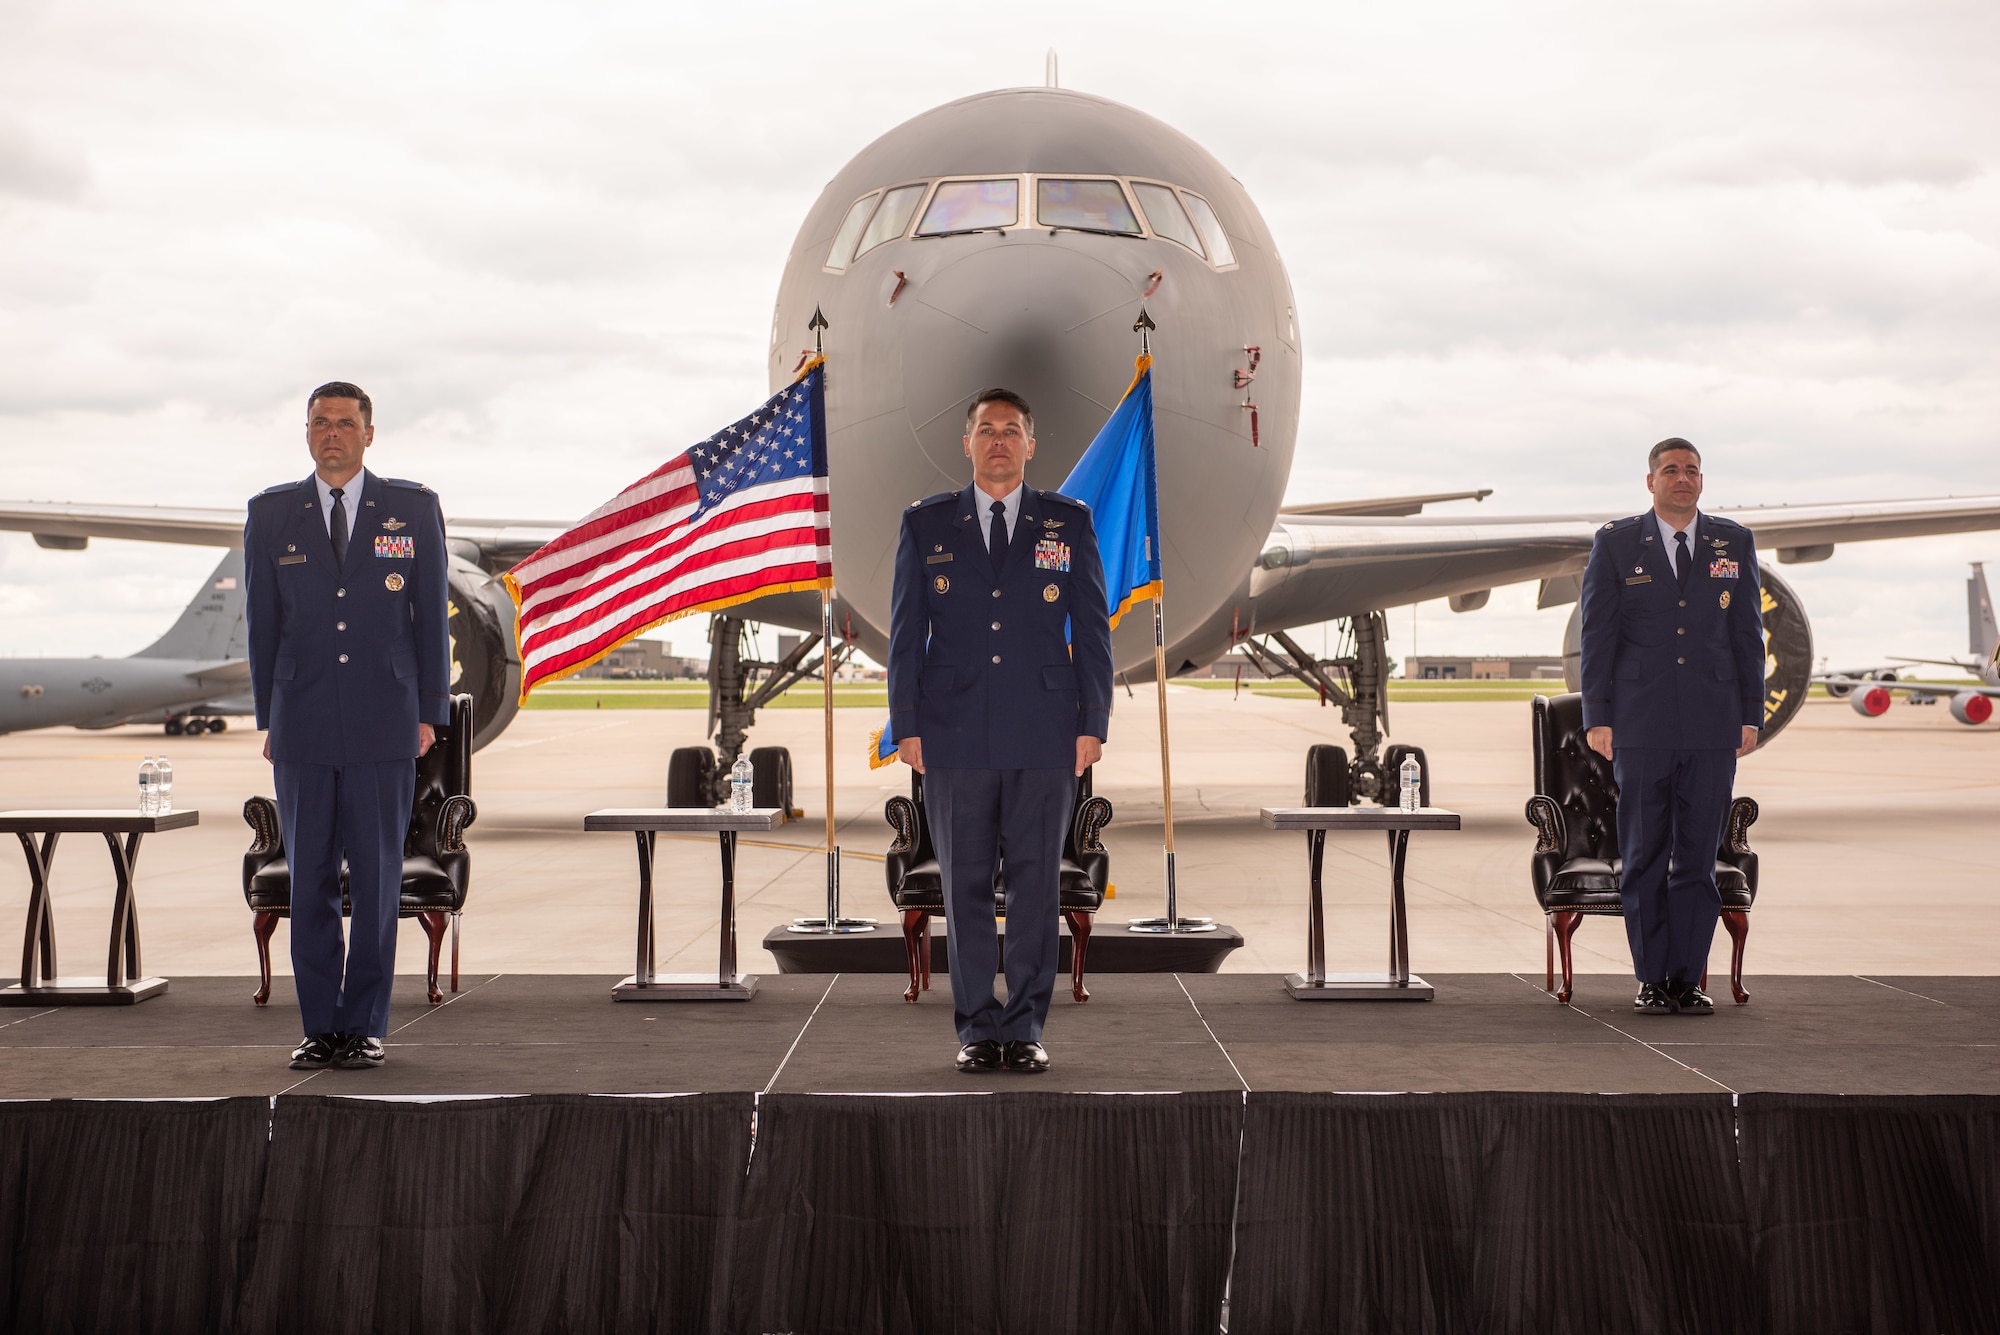 Lt. Col. Wesley Spurlock, 344th Air Refueling Squadron outgoing commander, center, is recognized during a change of command ceremony May 27, 2020, at McConnell Air Force Base, Kansas. Spurlock served as the commander of the 344th during the arrival of the KC-46A Pegasus. (U.S. Air Force photo by Staff Sgt. Chris Thornbury)